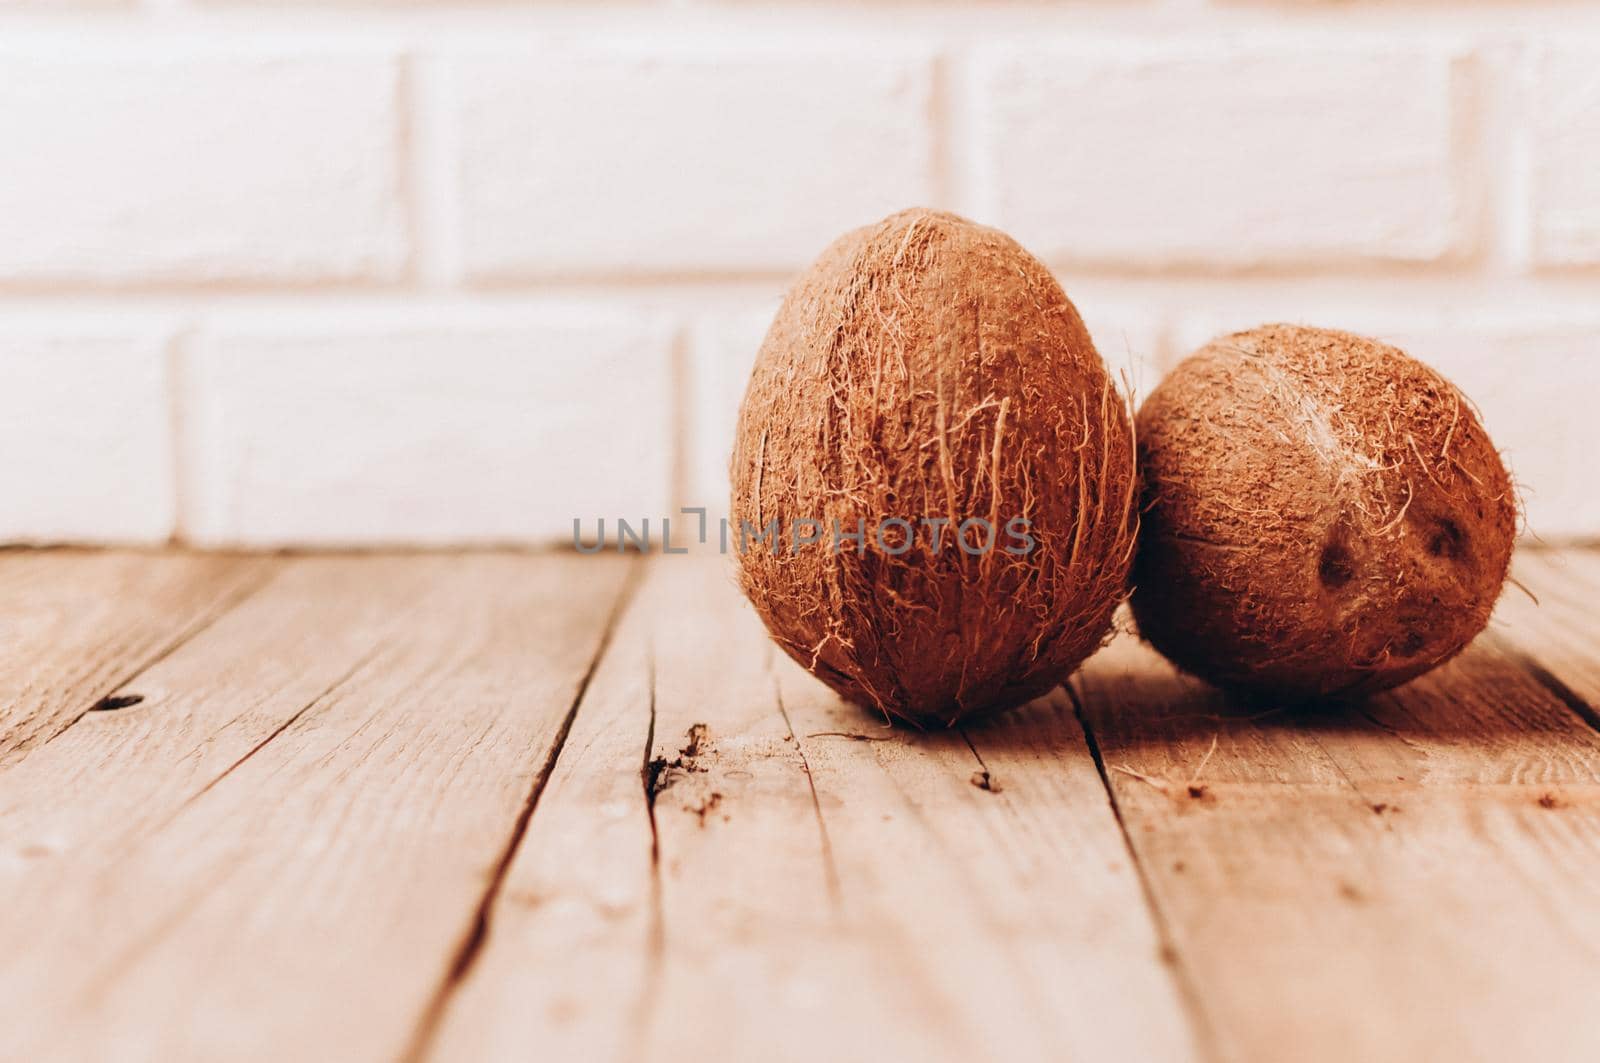 tropical coconut fruits on a wooden background in rustic style. Template for design. Copy space.